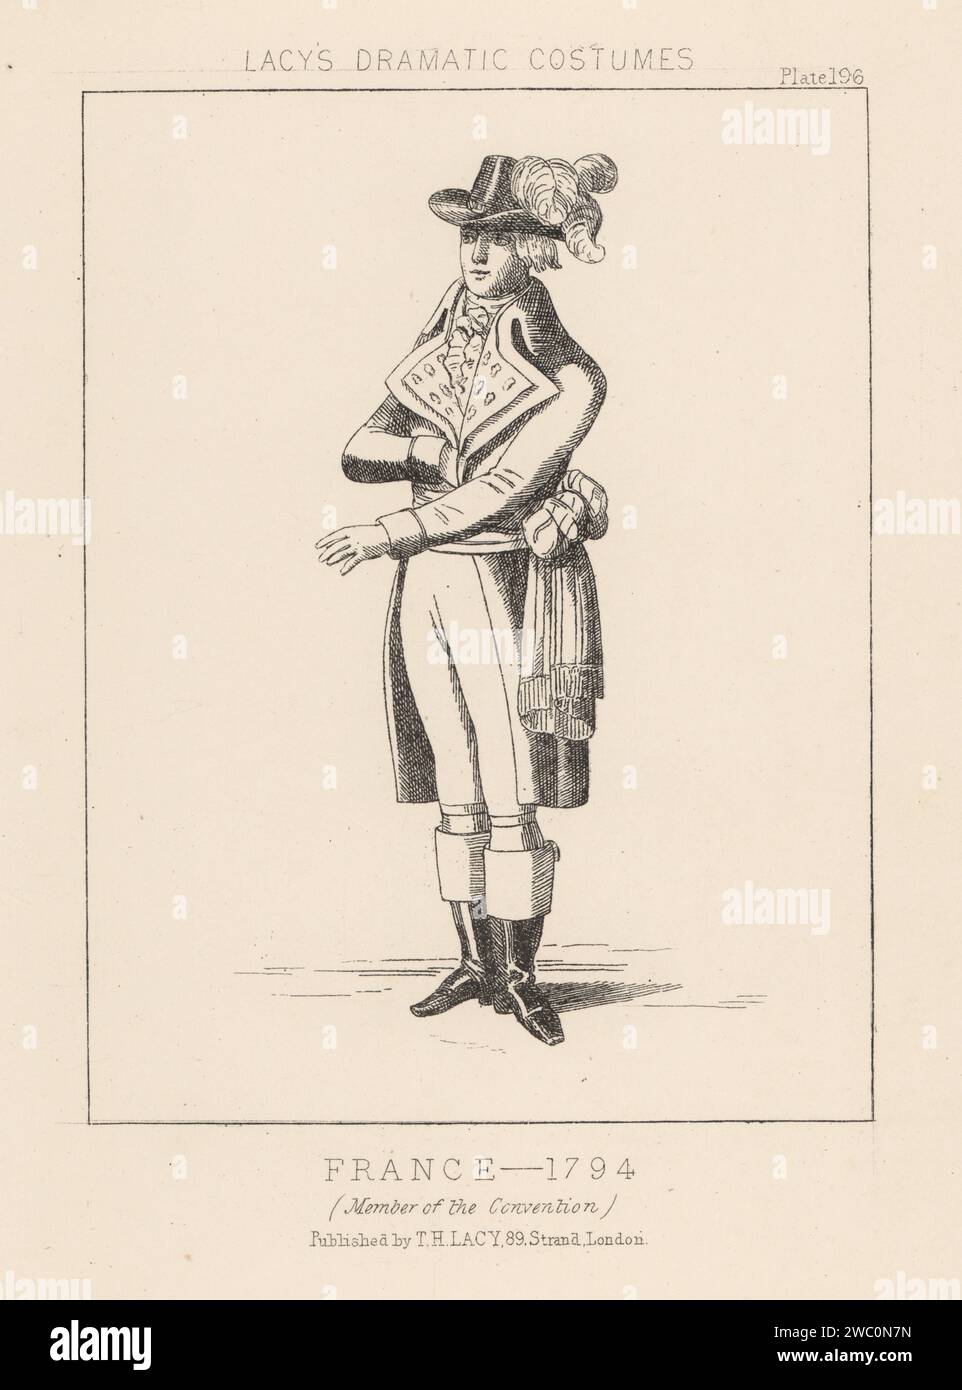 Costume of a member of the National Convention, France, 1794.  In plumed hat, riding coat, tricolor sash, boots. Lithograph from Thomas Hailes Lacy's Male Costumes, Historical, National and Dramatic in 200 Plates, London, 1865. Lacy (1809-1873) was a British actor, playwright, theatrical manager and publisher. Stock Photo